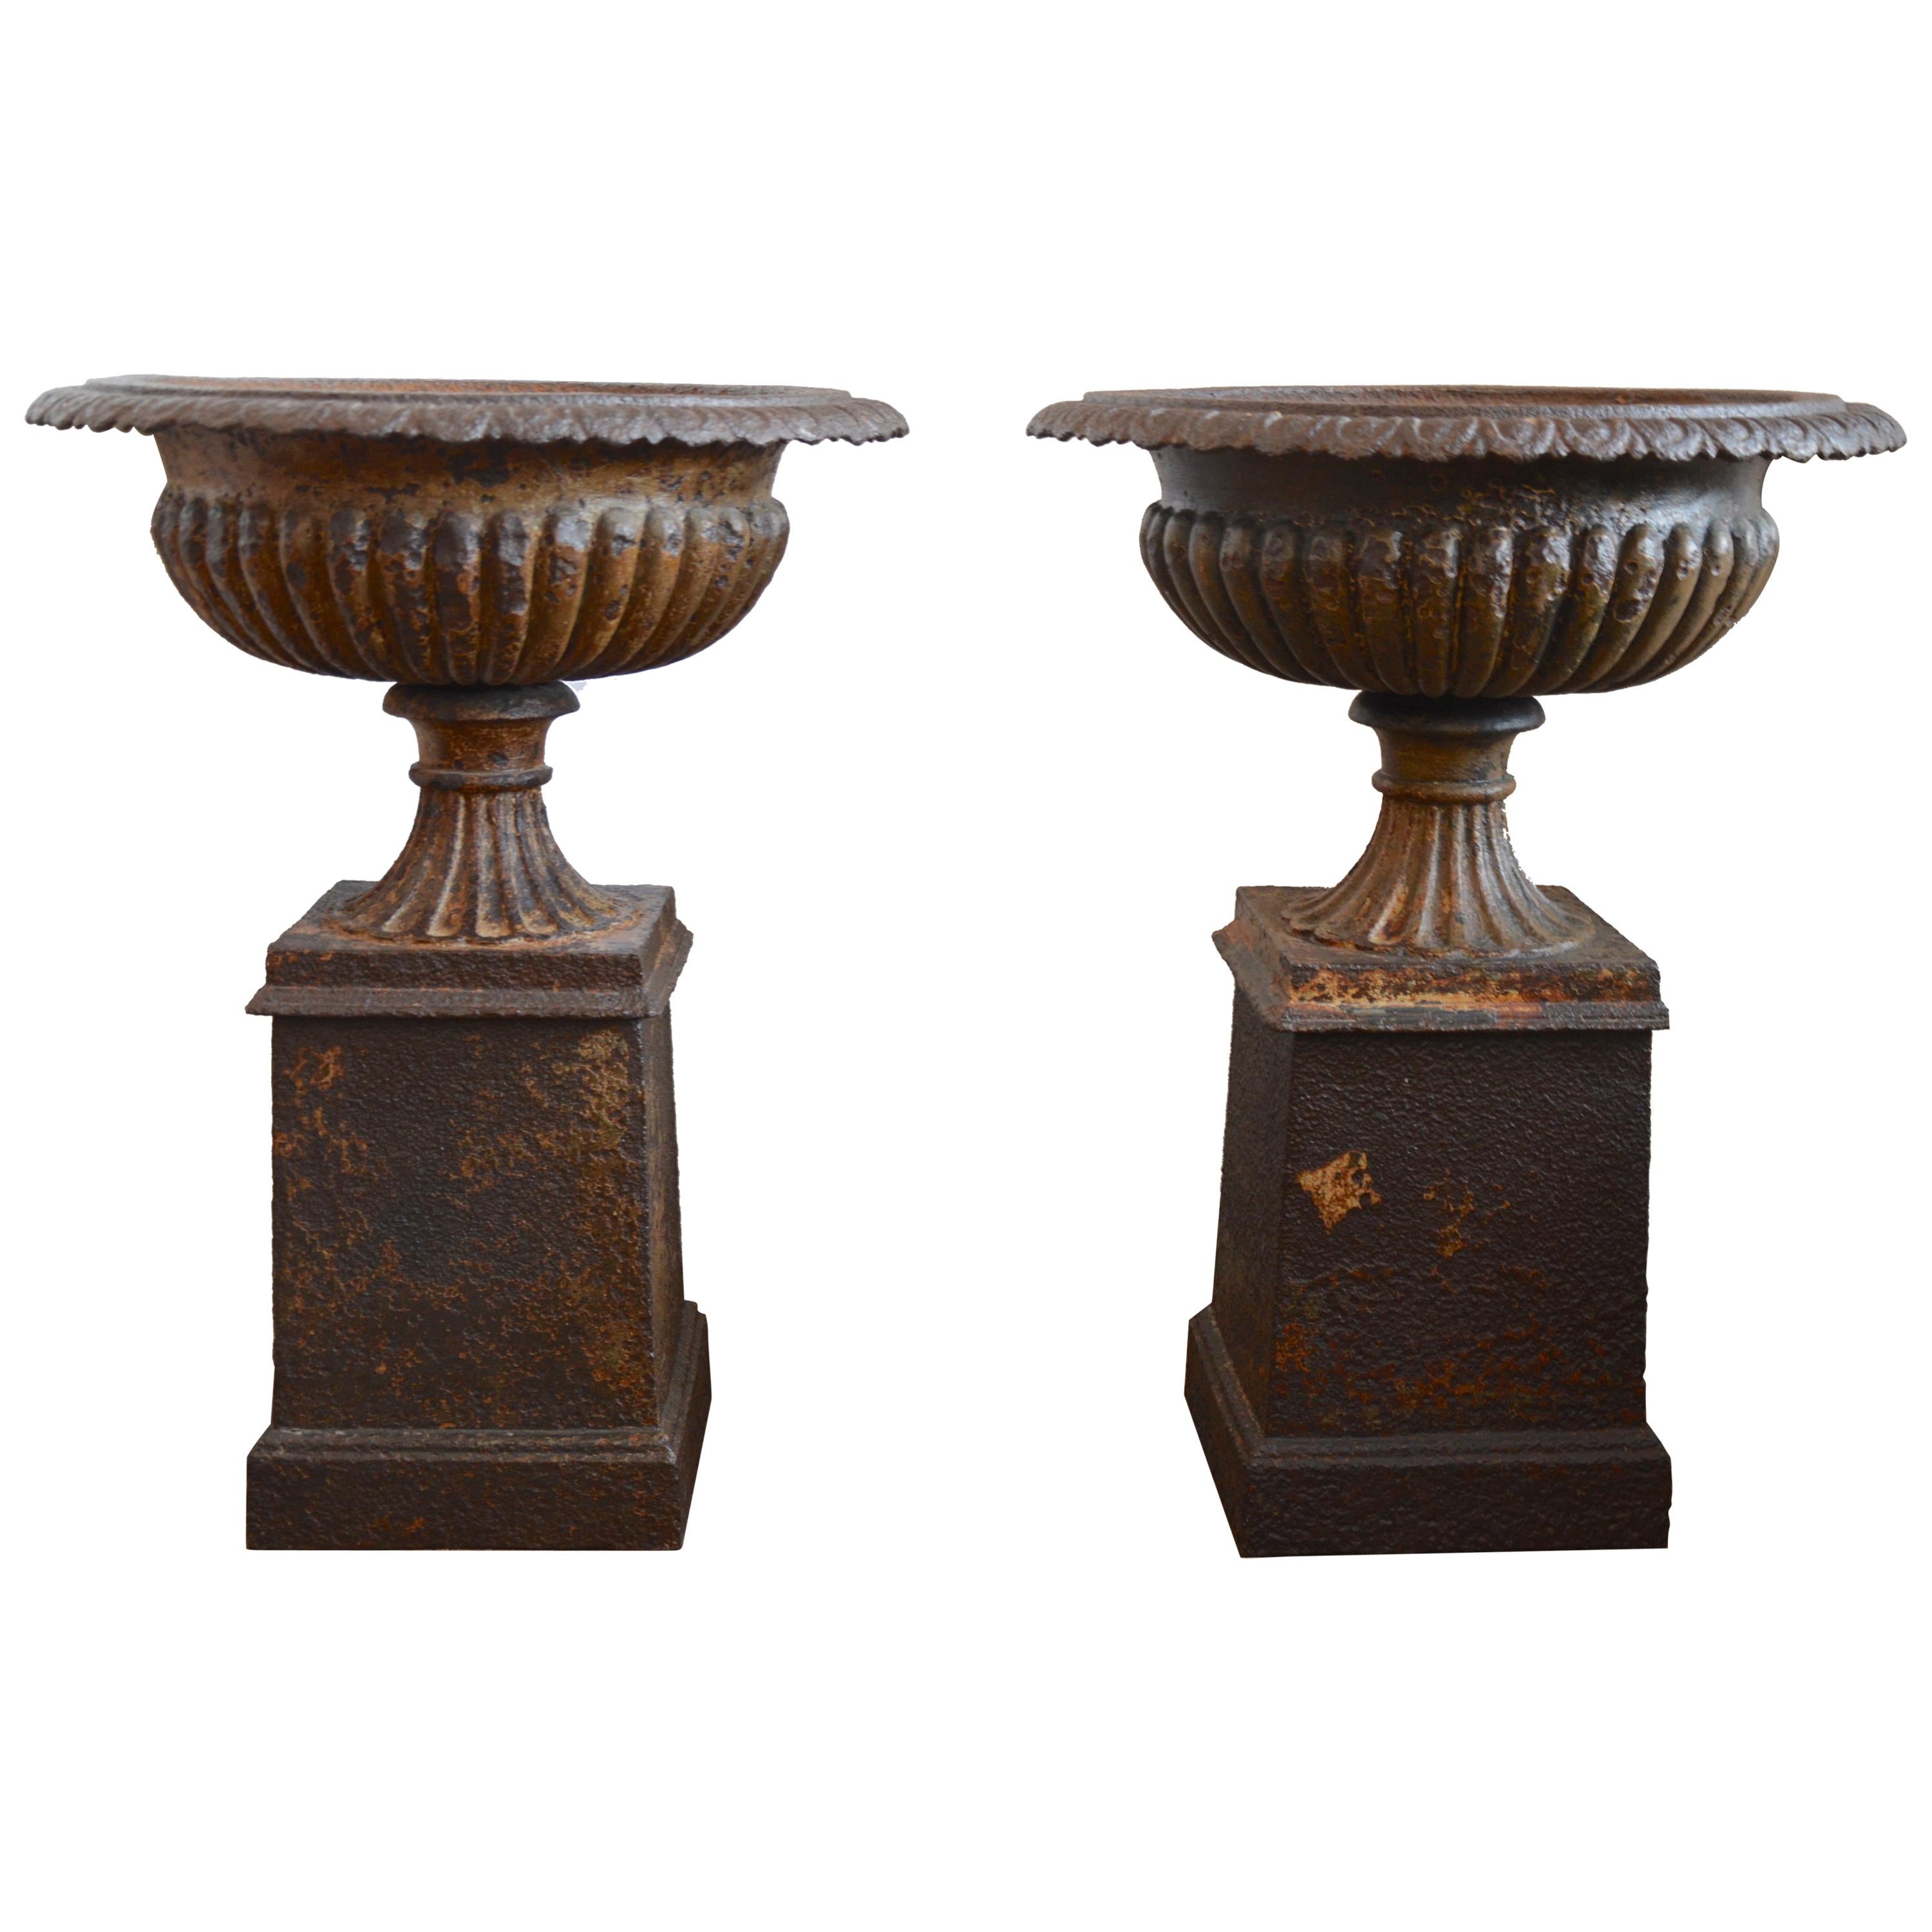 Pair of Large French Empire Style 19th Century Cast Iron Garden Urns